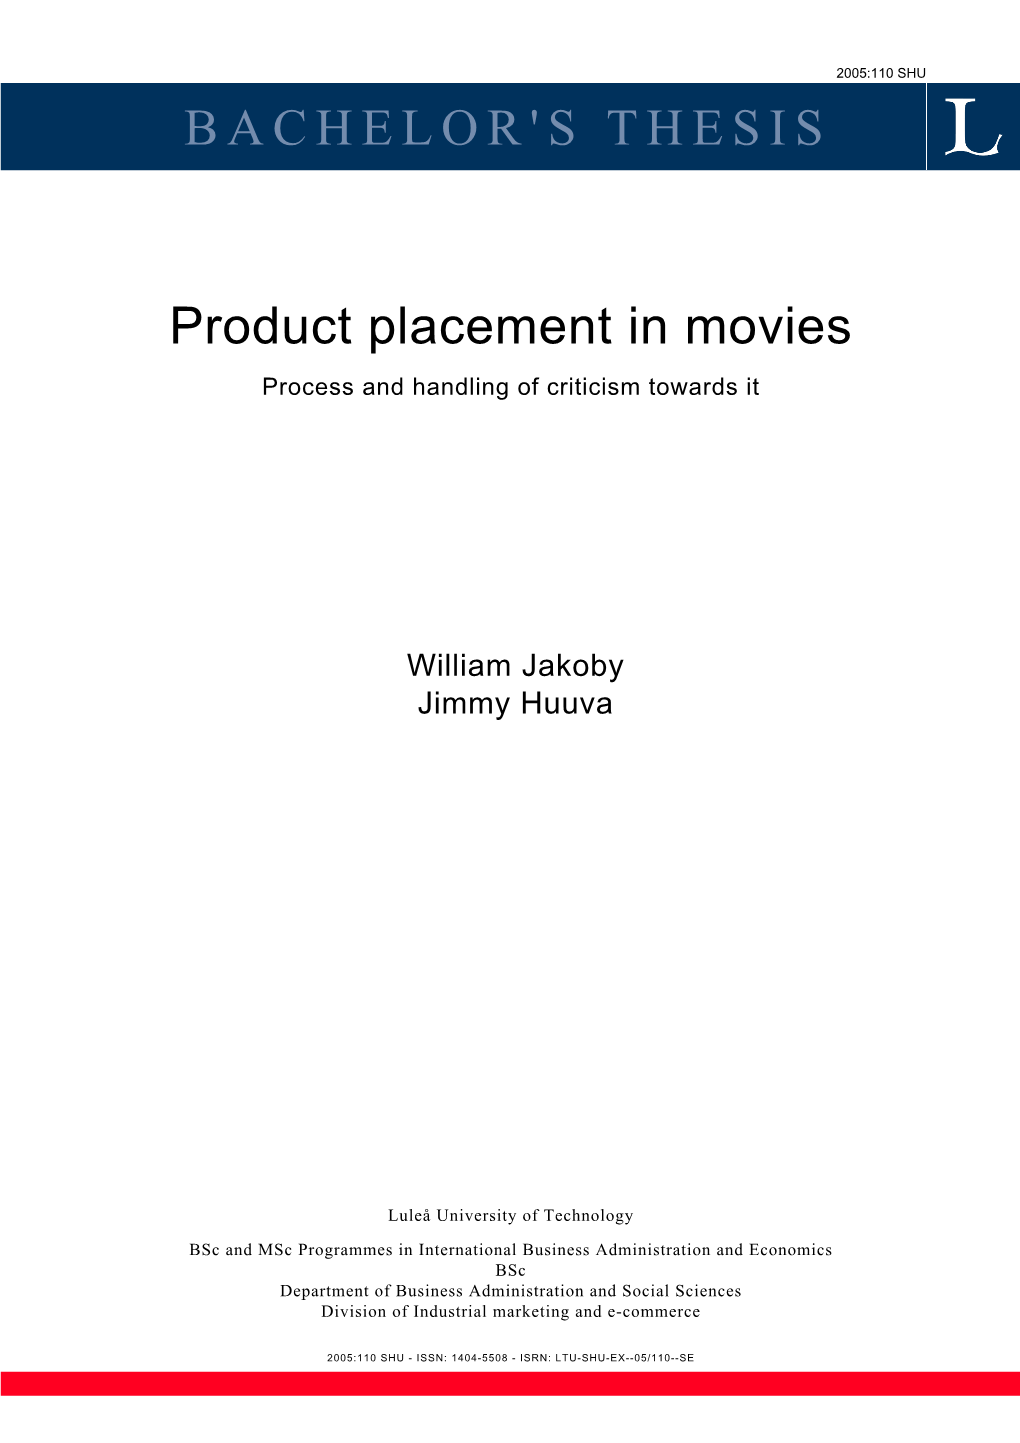 Product Placement in Movies Process and Handling of Criticism Towards It